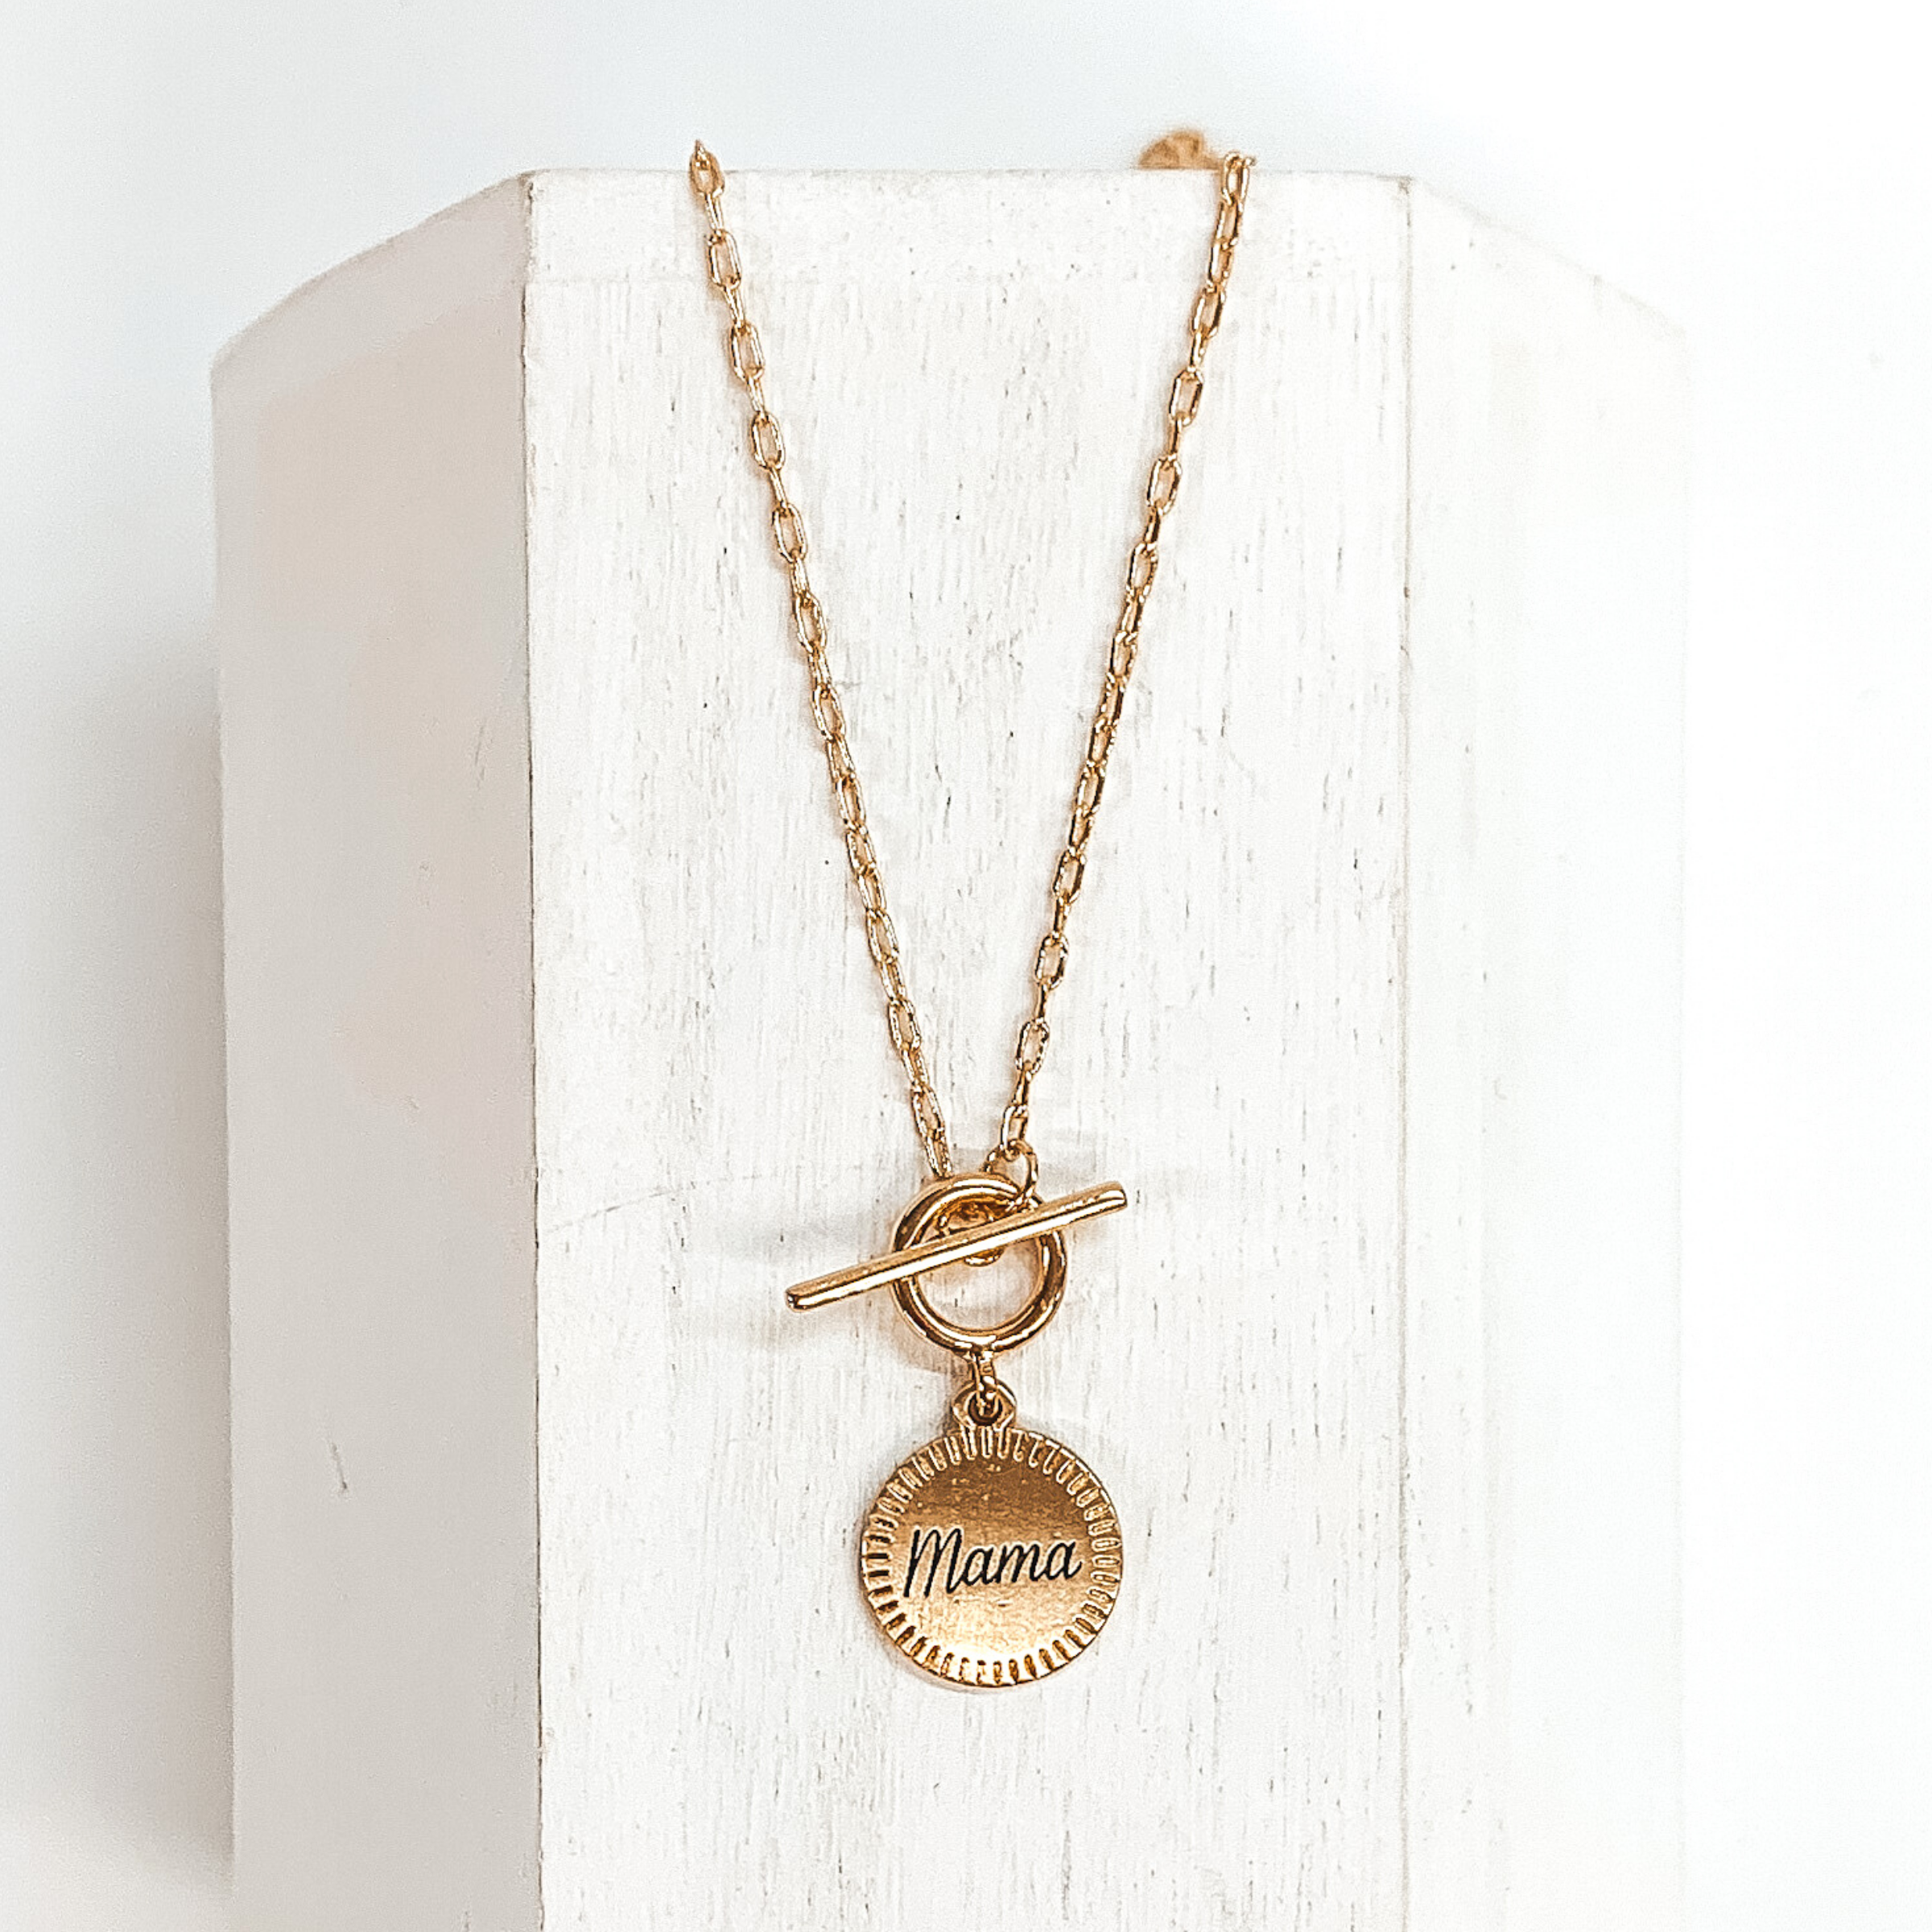 This is a gold chained necklace with a front toggle clasp that has a hanging circle pendant. In the center of the pendant the word "Mama" is engraved in cursive. This necklace is pictured laying on a white block on a white background.